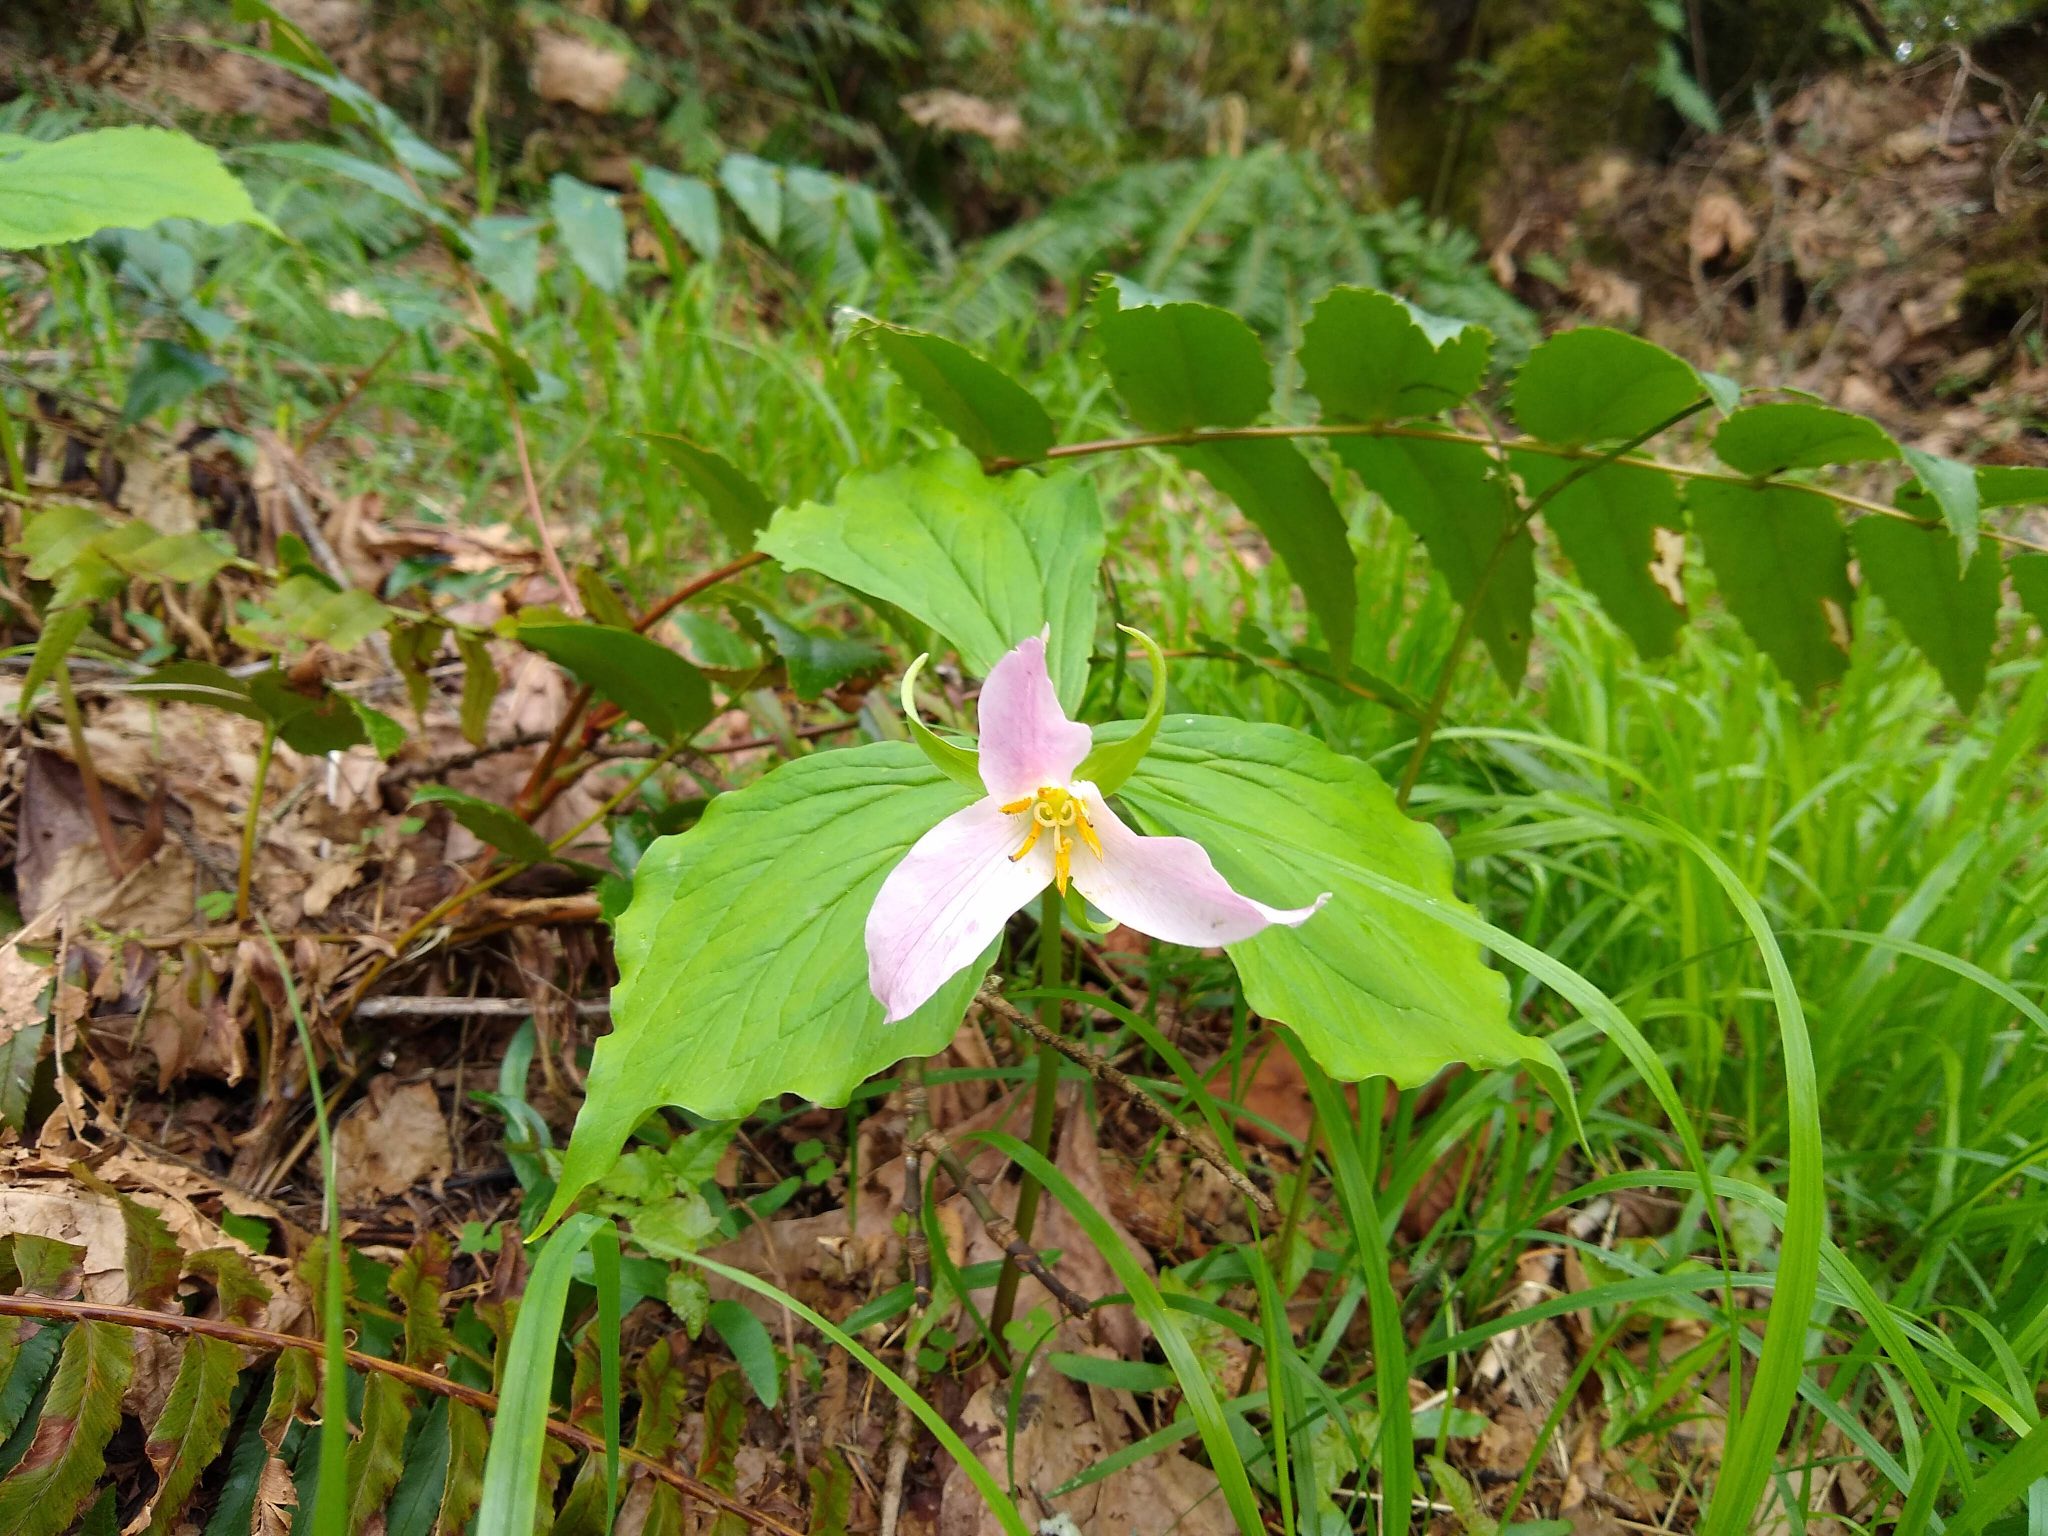 A wildflower with three light purple petals and a yellow center in the green grass of the forest floor